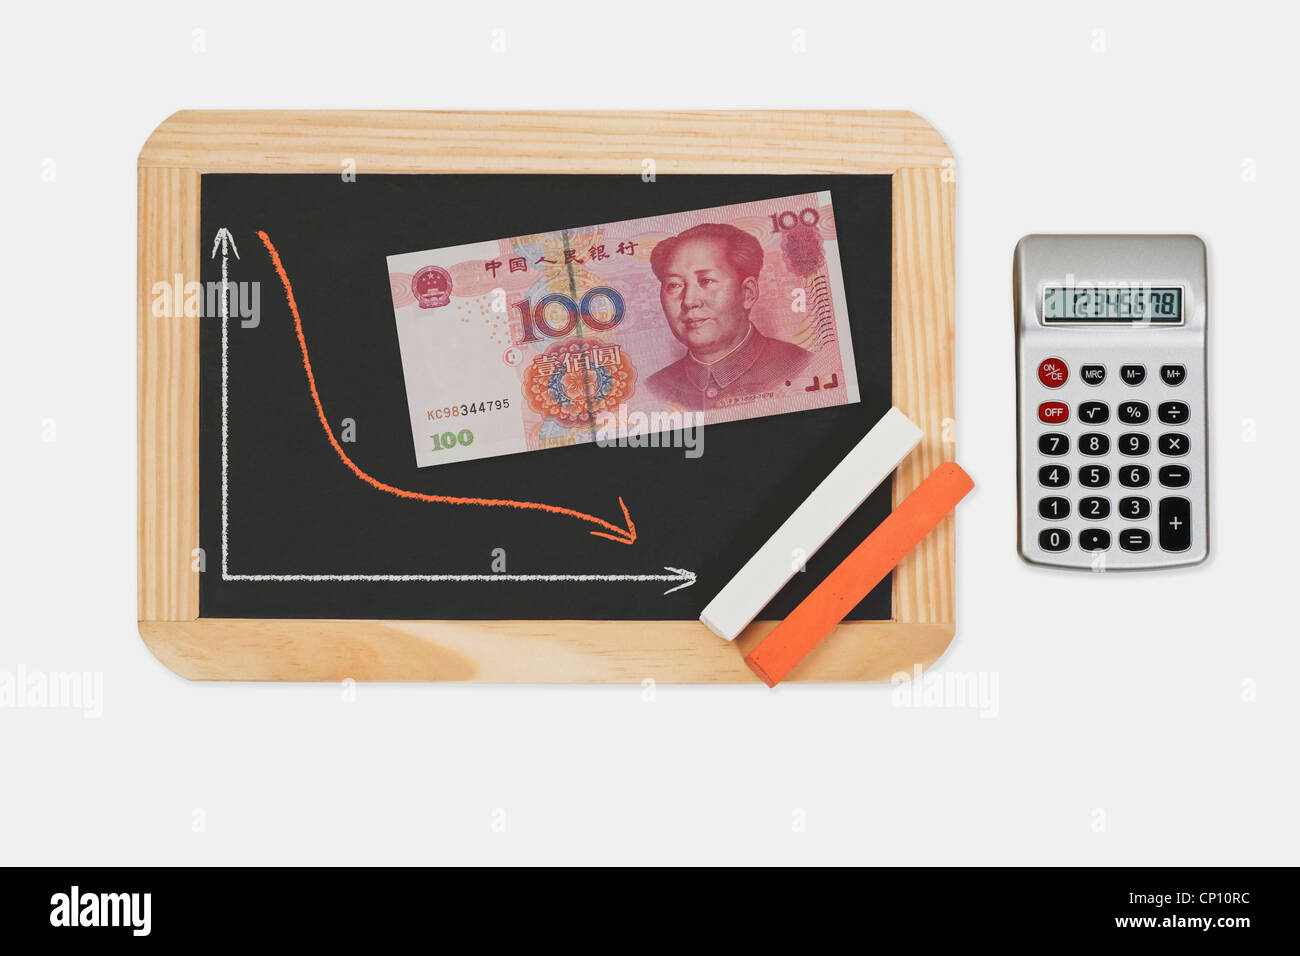 Chalkboard, chart with an declined curve. On the chalkboard lies a Chinese 100 Yuan banknote with the portrait of Mao Zedong. Stock Photo